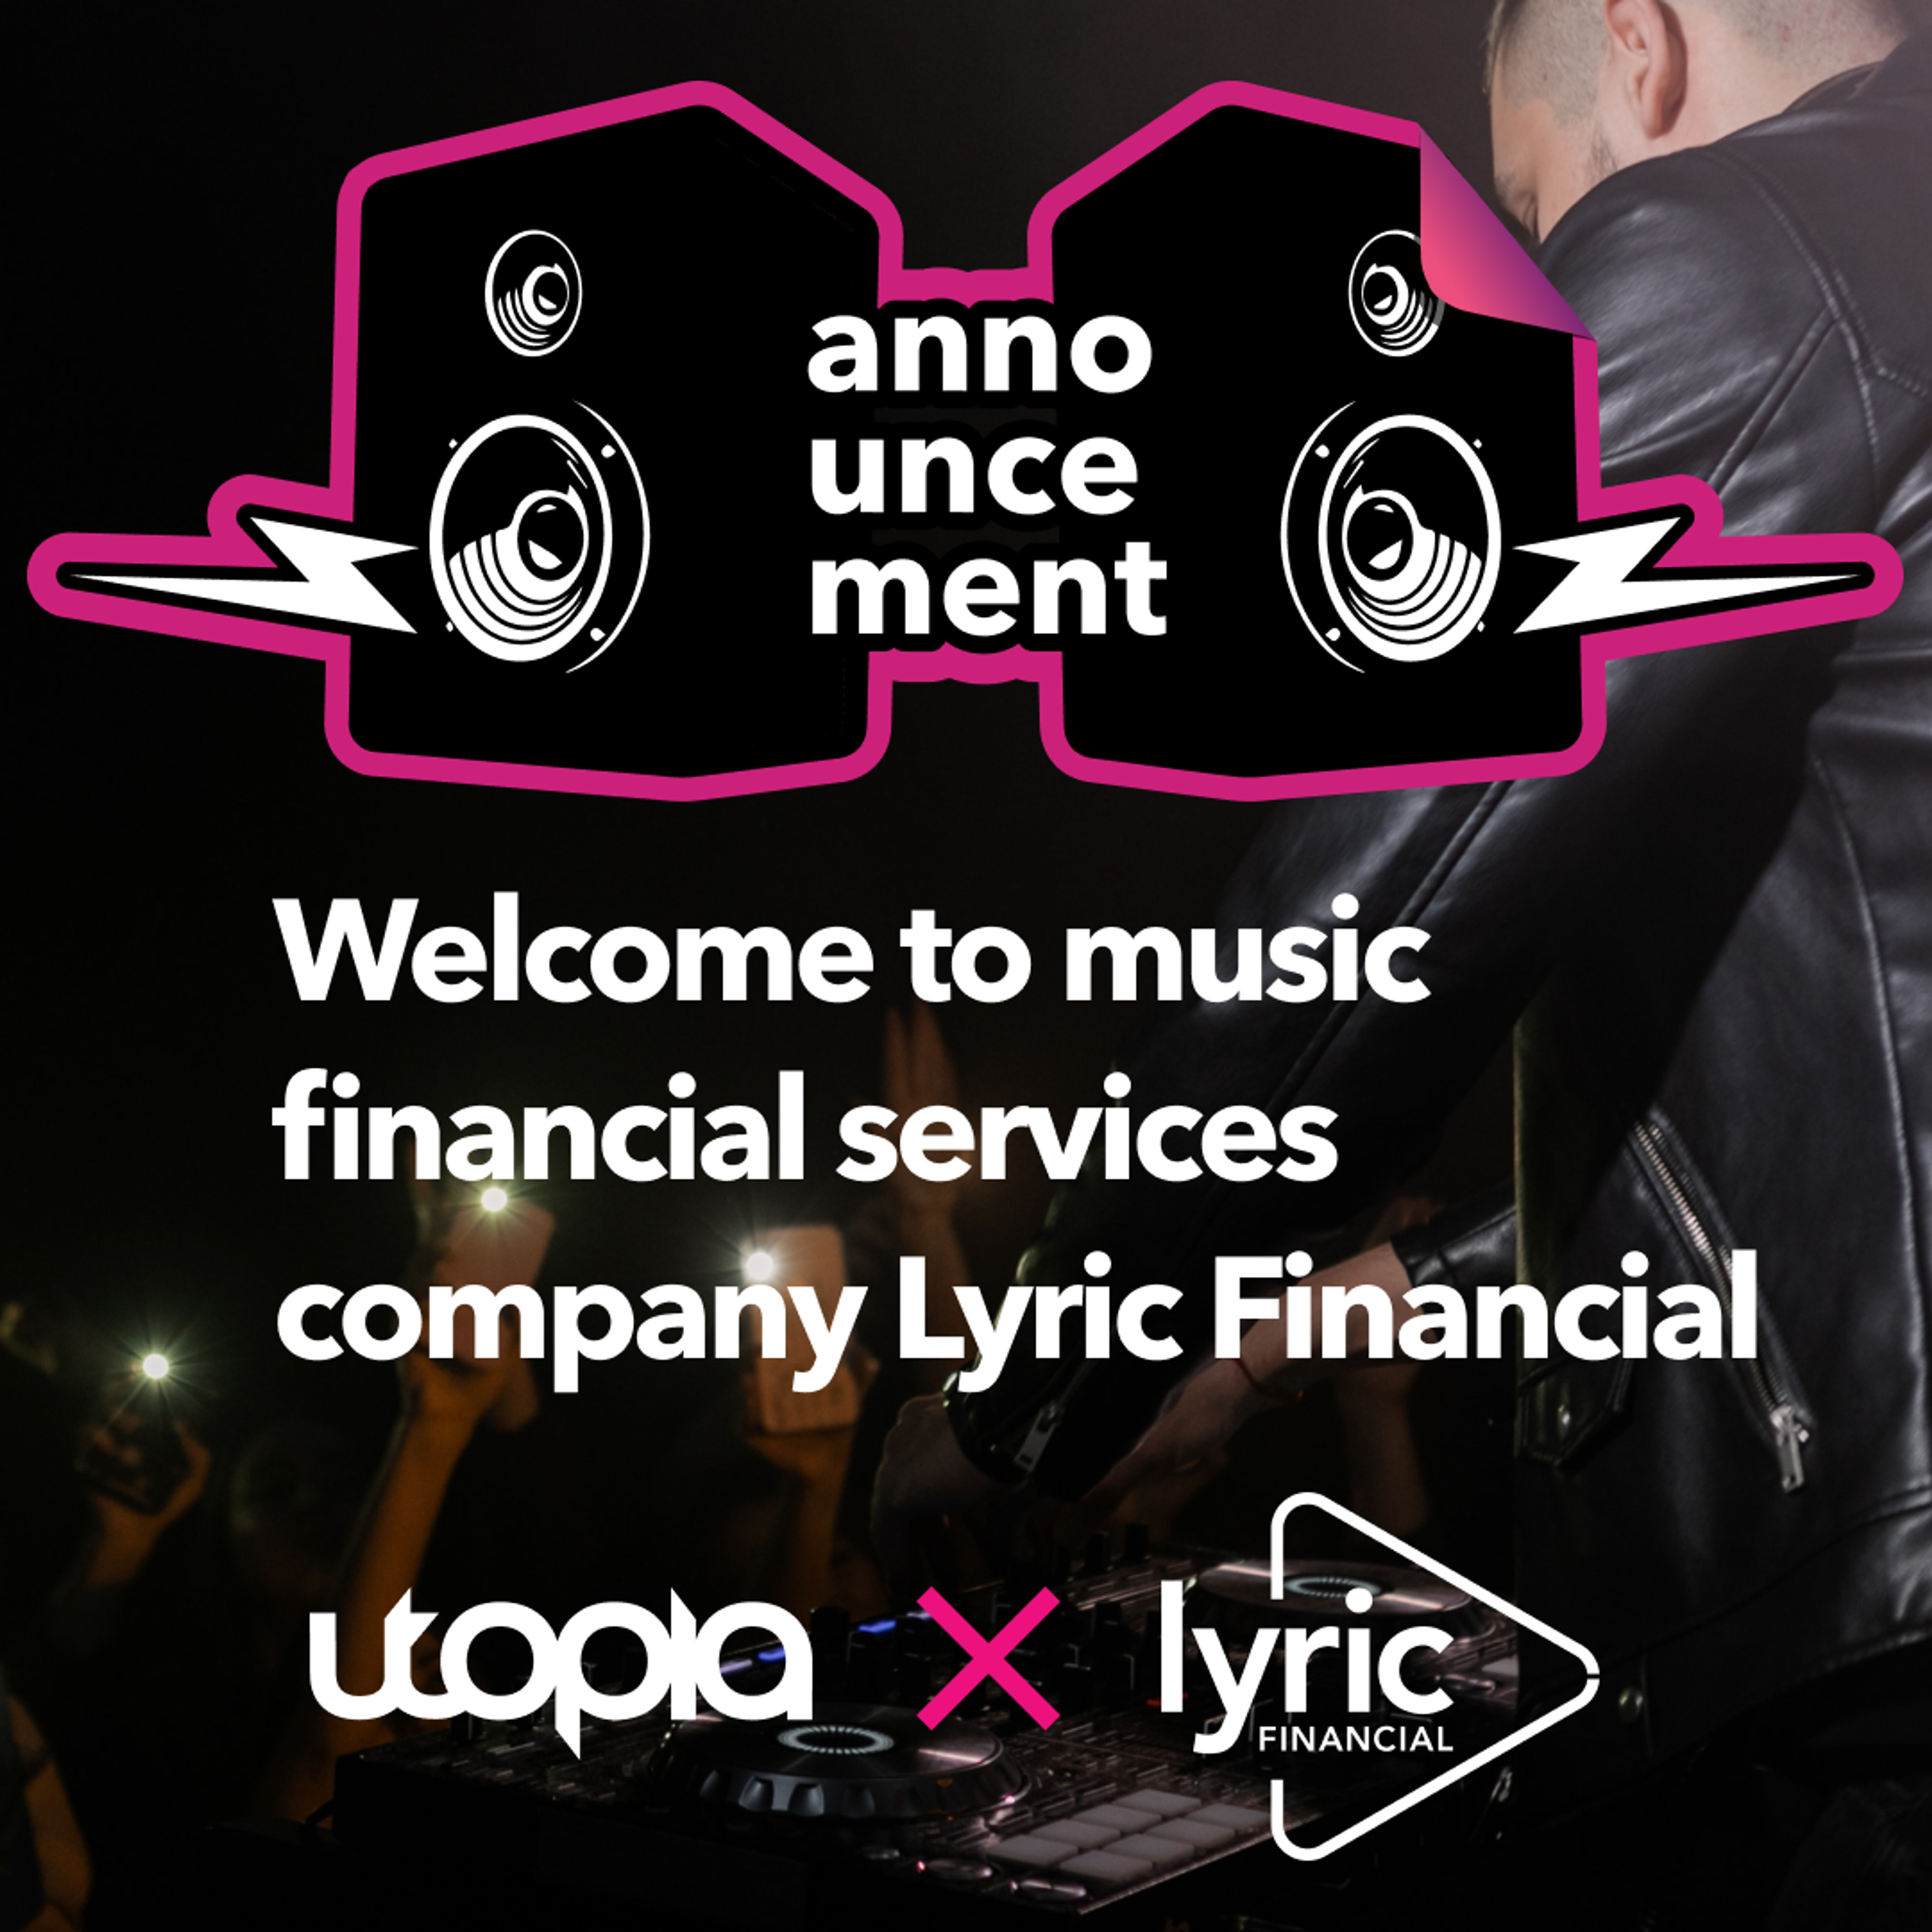 Card image for Utopia Music acquisition of Lyric Financial